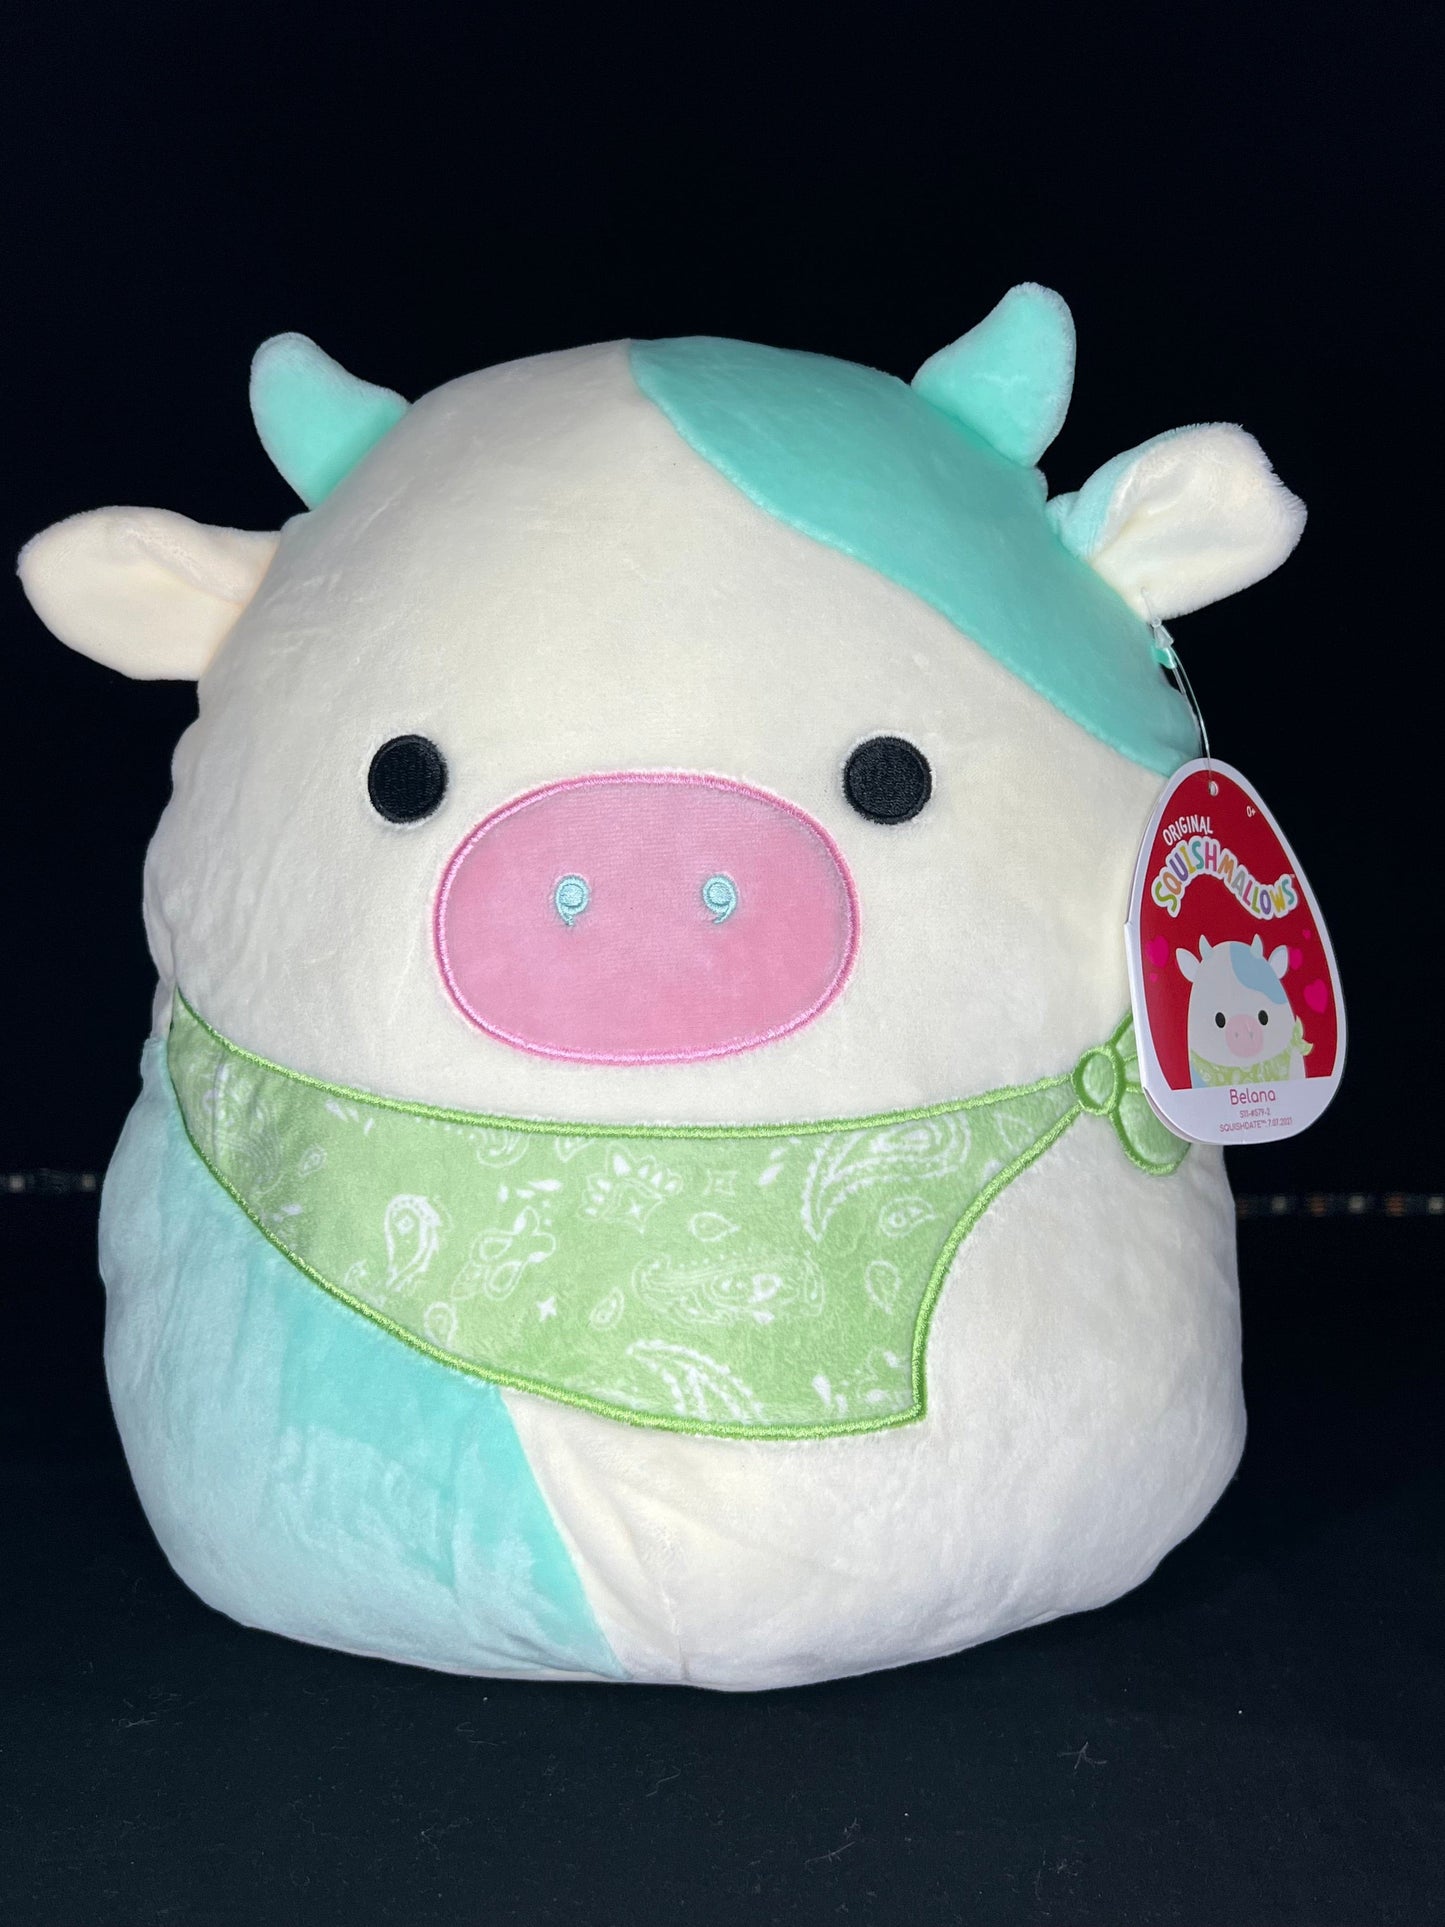 Squishmallow 11” Belana the Cow with Green Bandana.